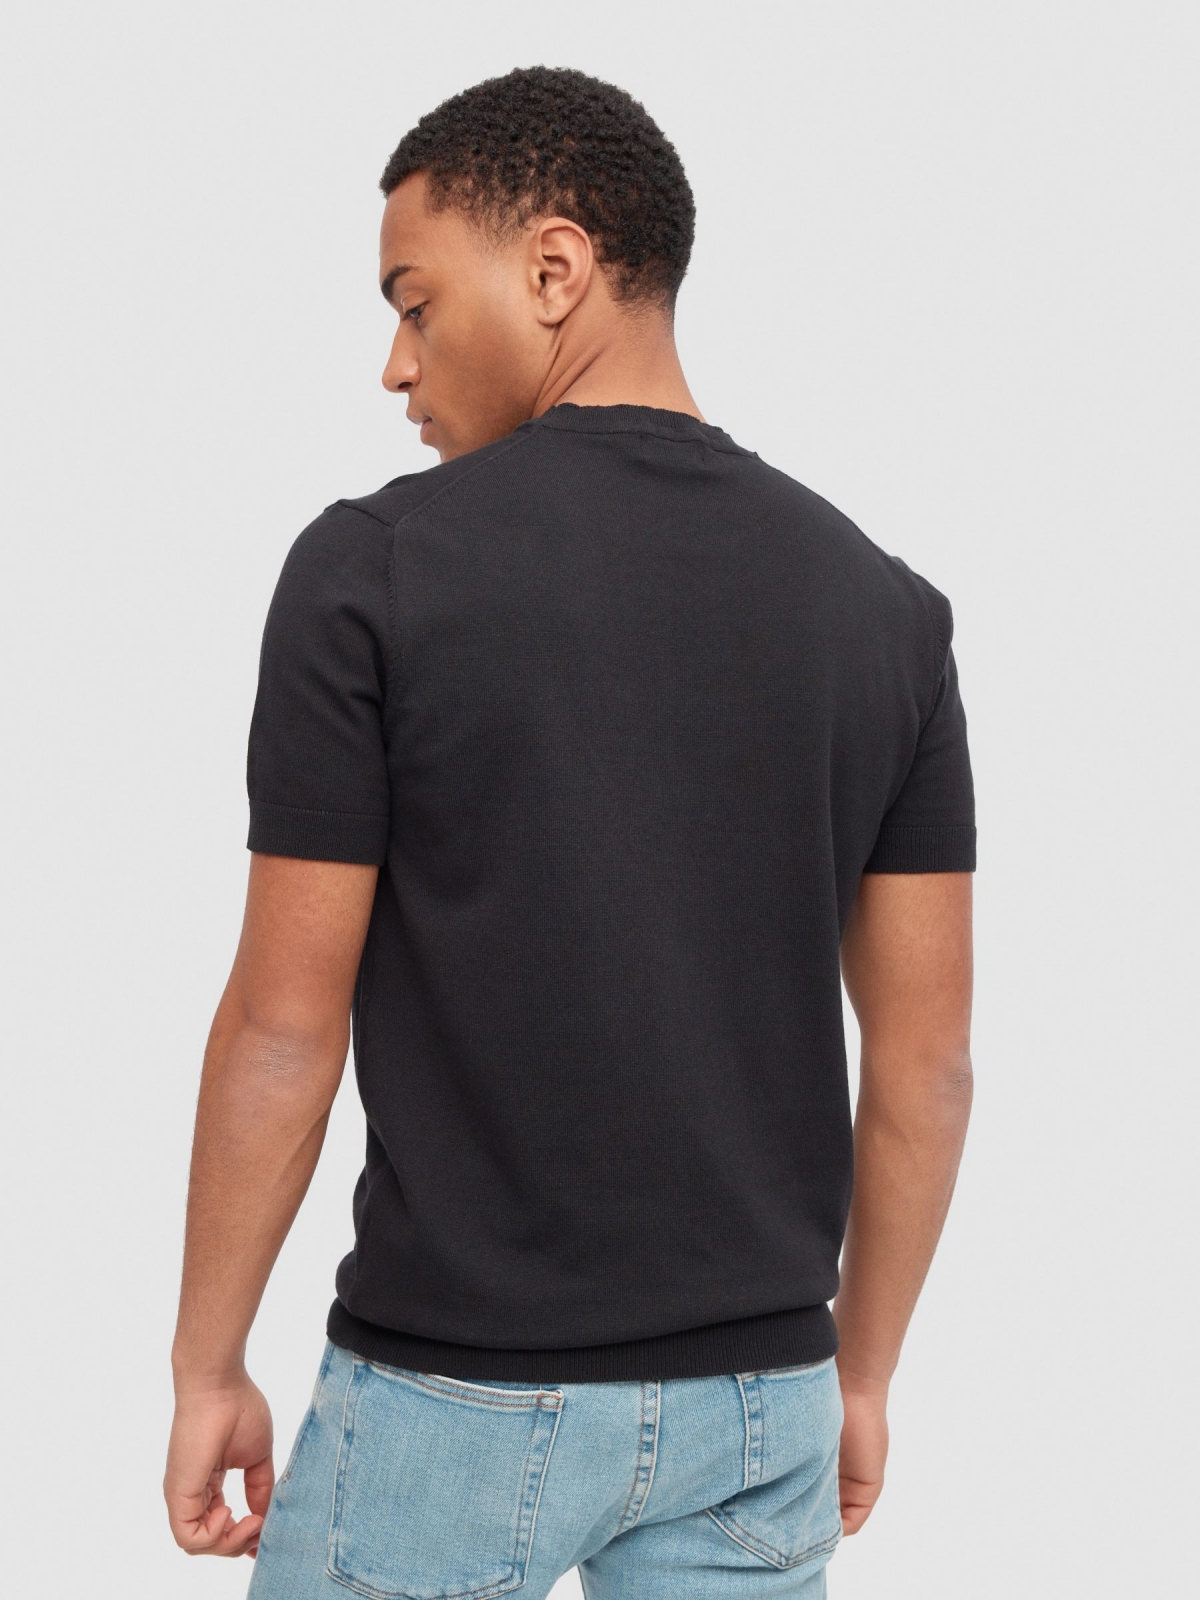 Basic knitted T-shirt black middle back view